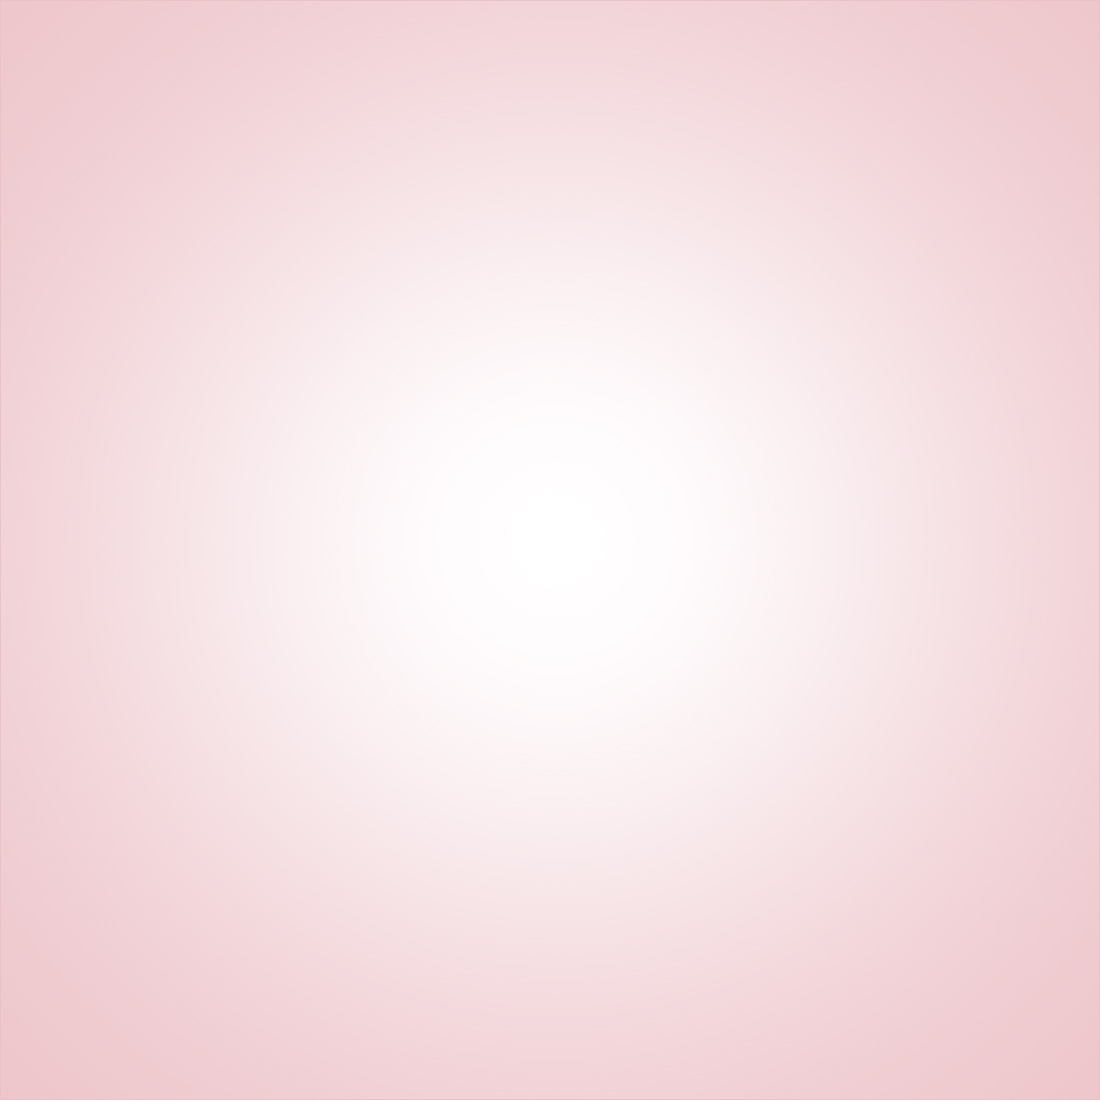 Pink background with a white border.